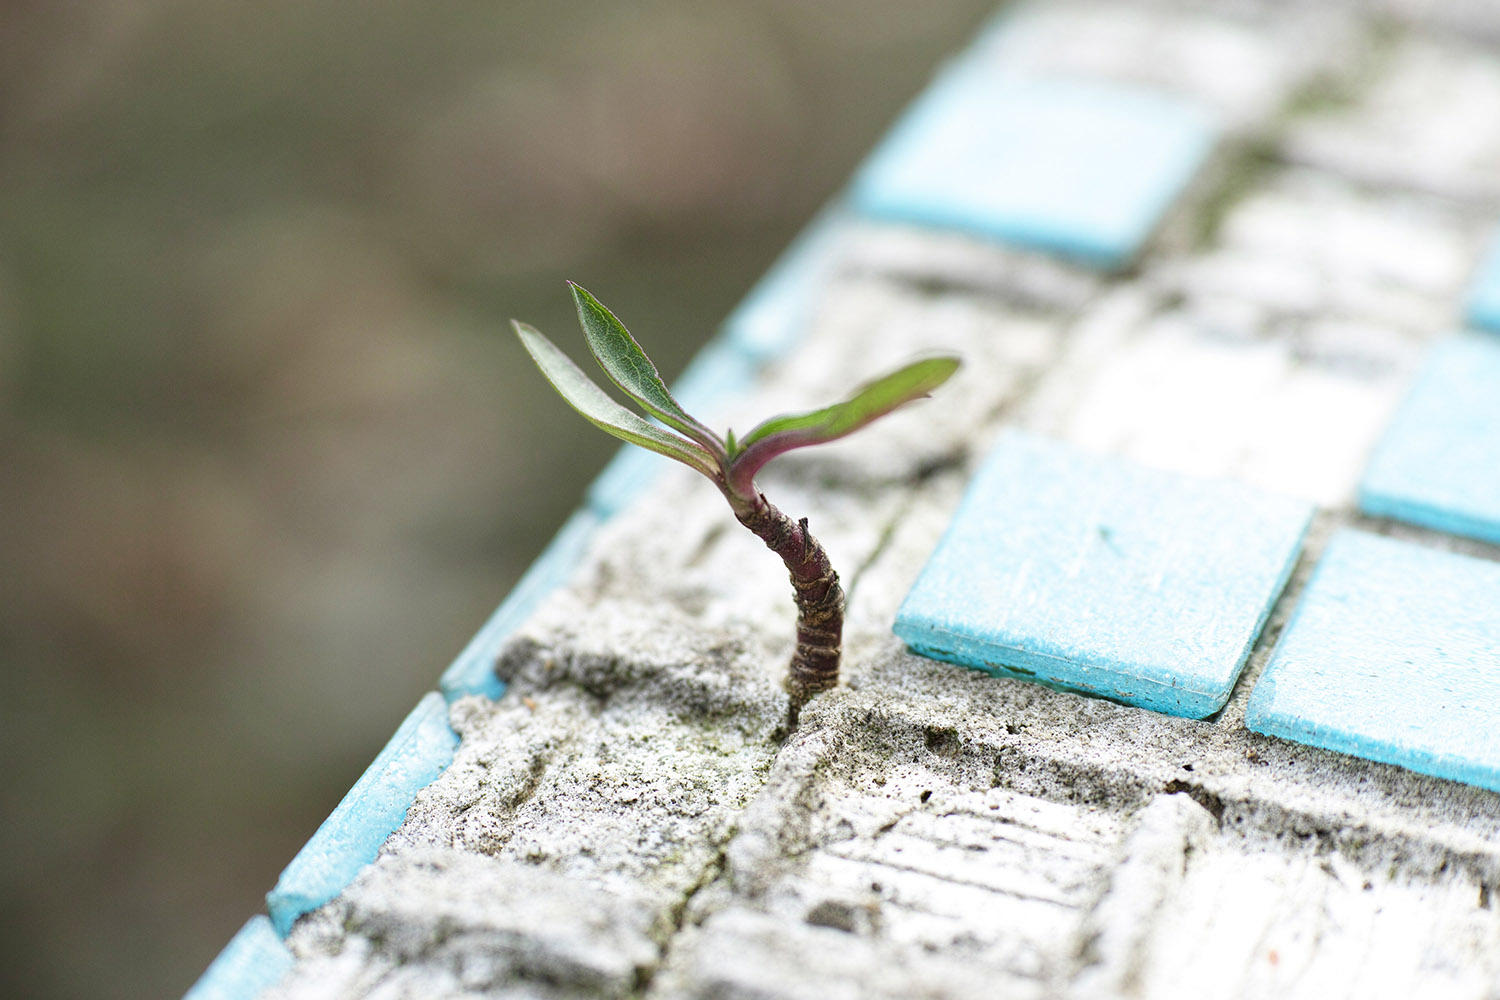 Small plant sprouting from cement and tile